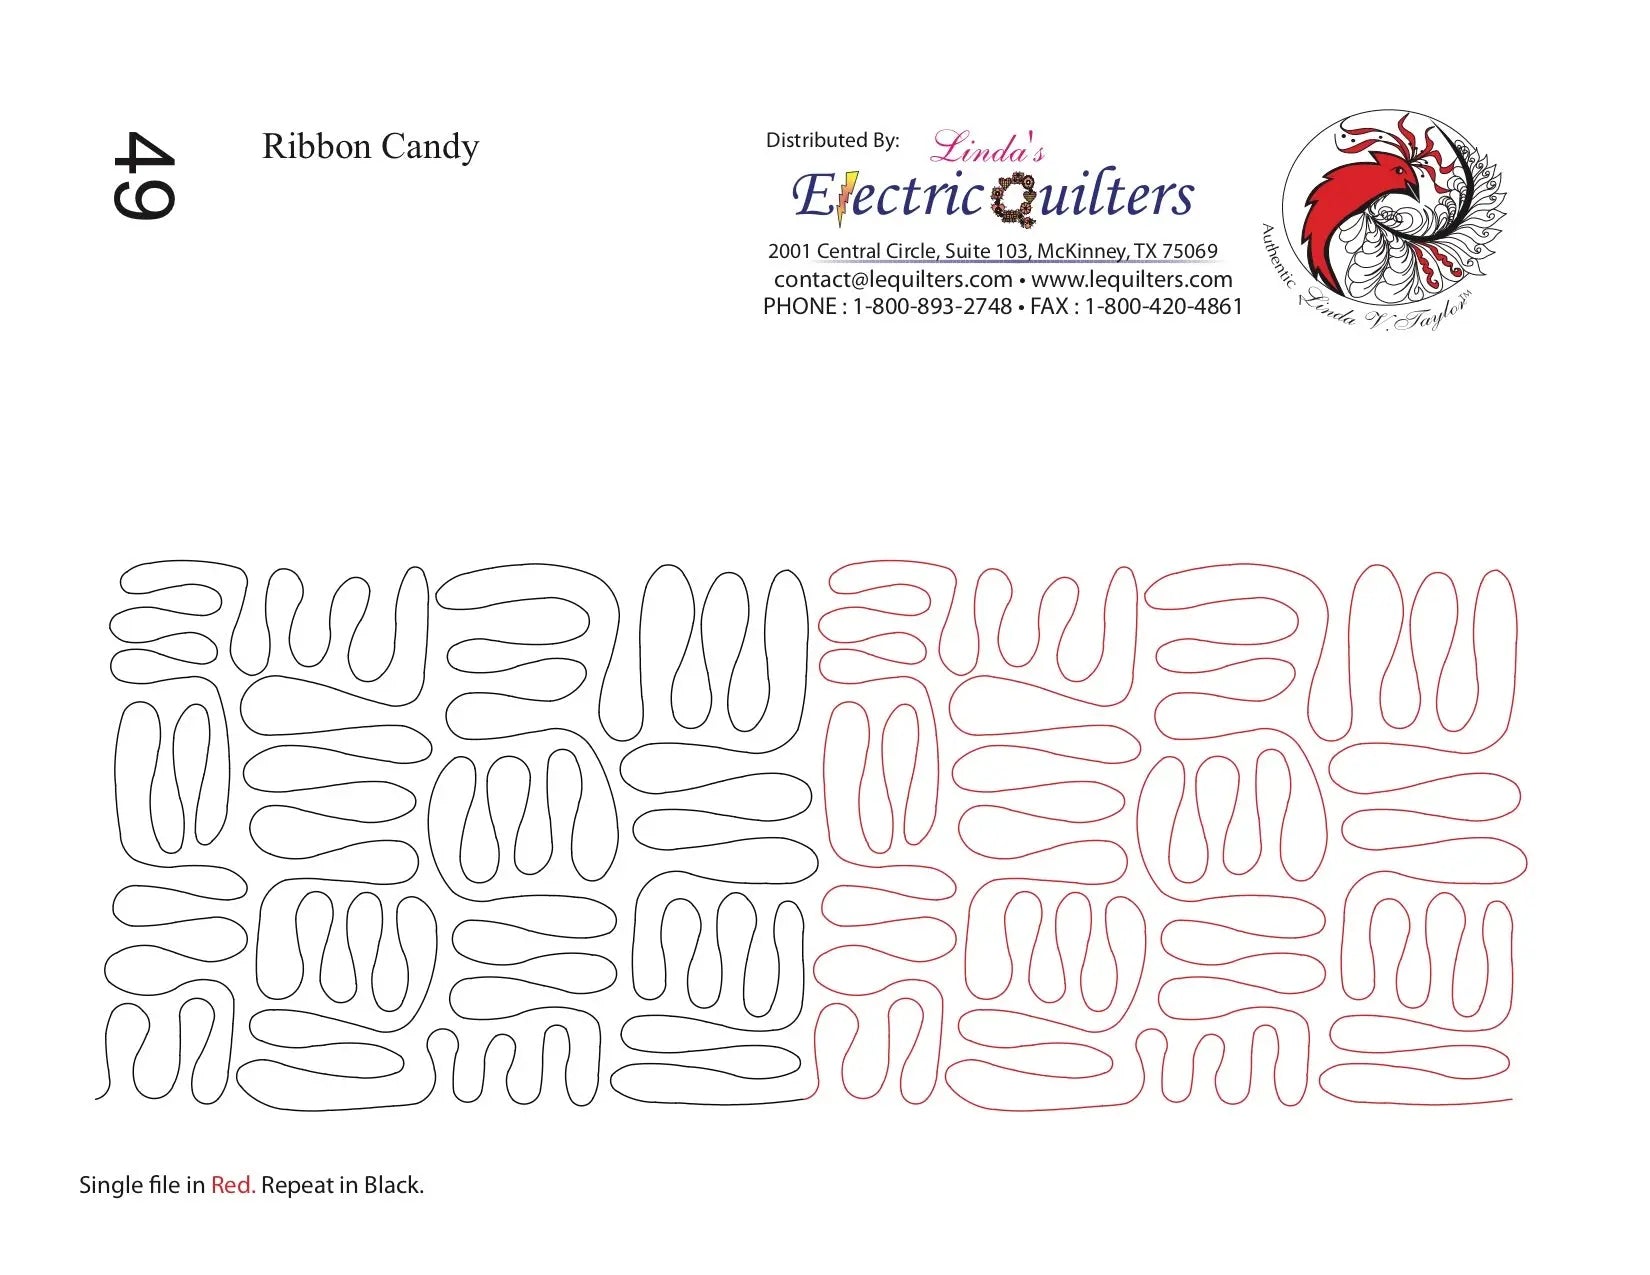 049 Ribbon Candy Pantograph by Linda V. Taylor - Linda's Electric Quilters